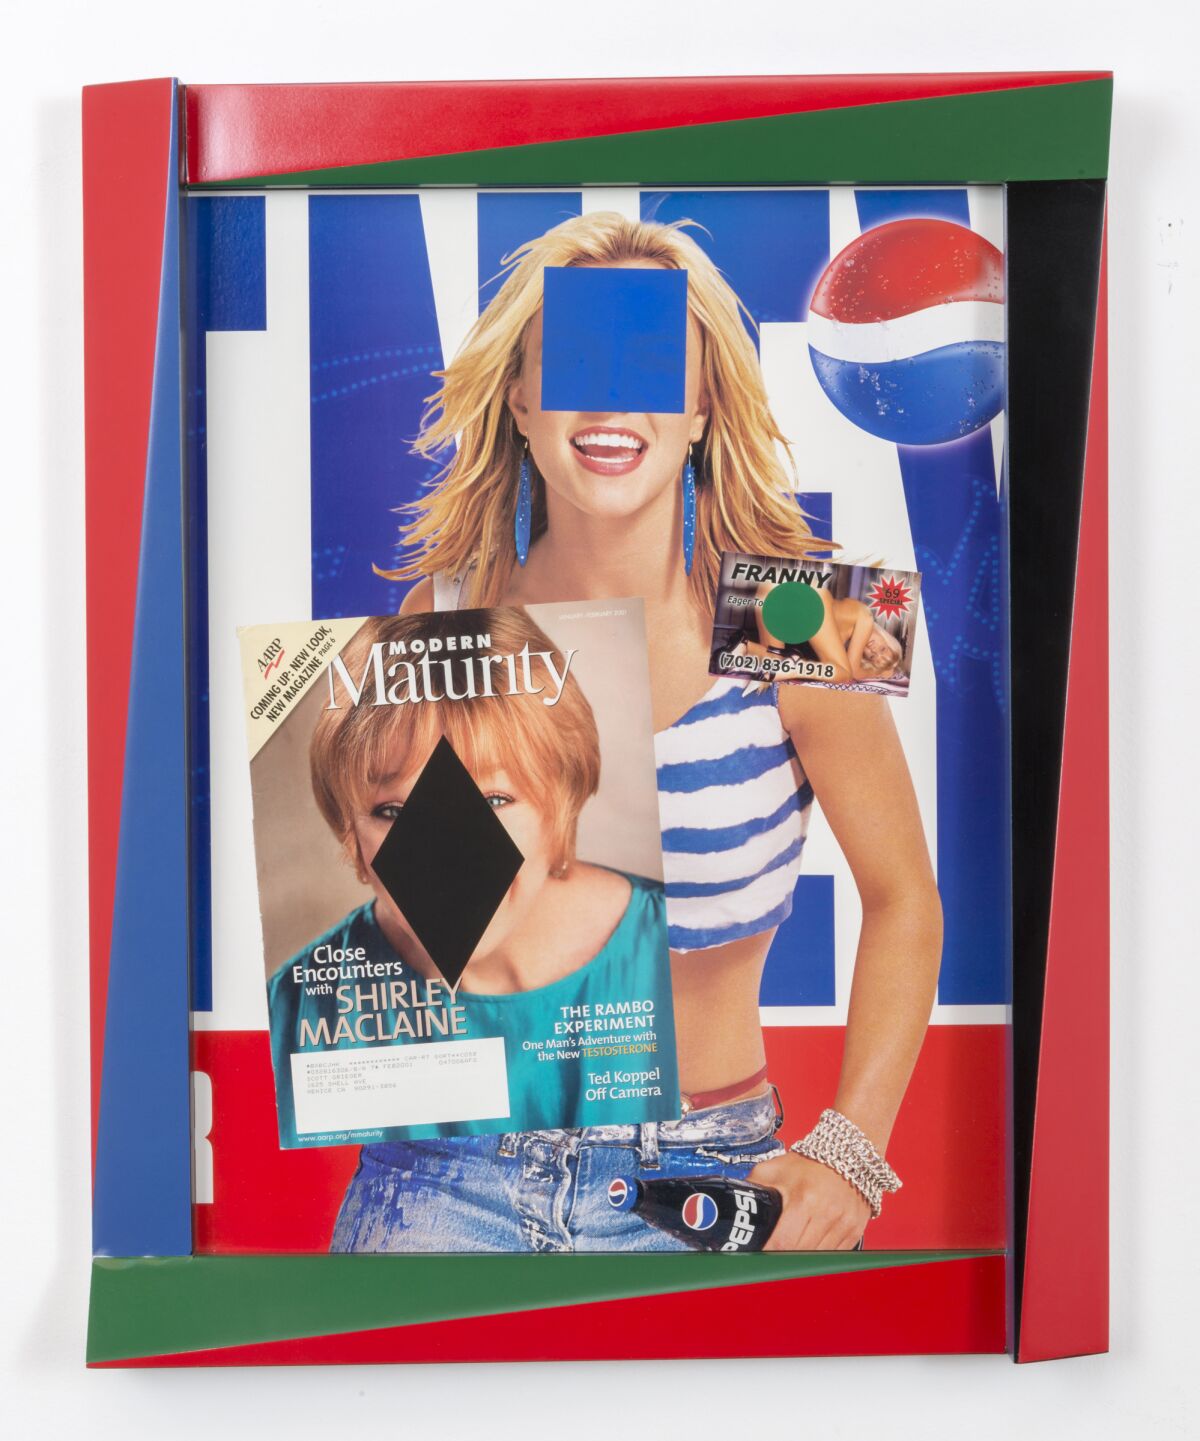 Alexis Smith: Her Carefully Crafted Collages and Installations are on display at MCASD La Jolla ?url=https%3A%2F%2Fcalifornia times brightspot.s3.amazonaws.com%2Fe4%2F05%2F1d4378a941e6b4b80773a90fd1fe%2F2002 degree of difficulty 1